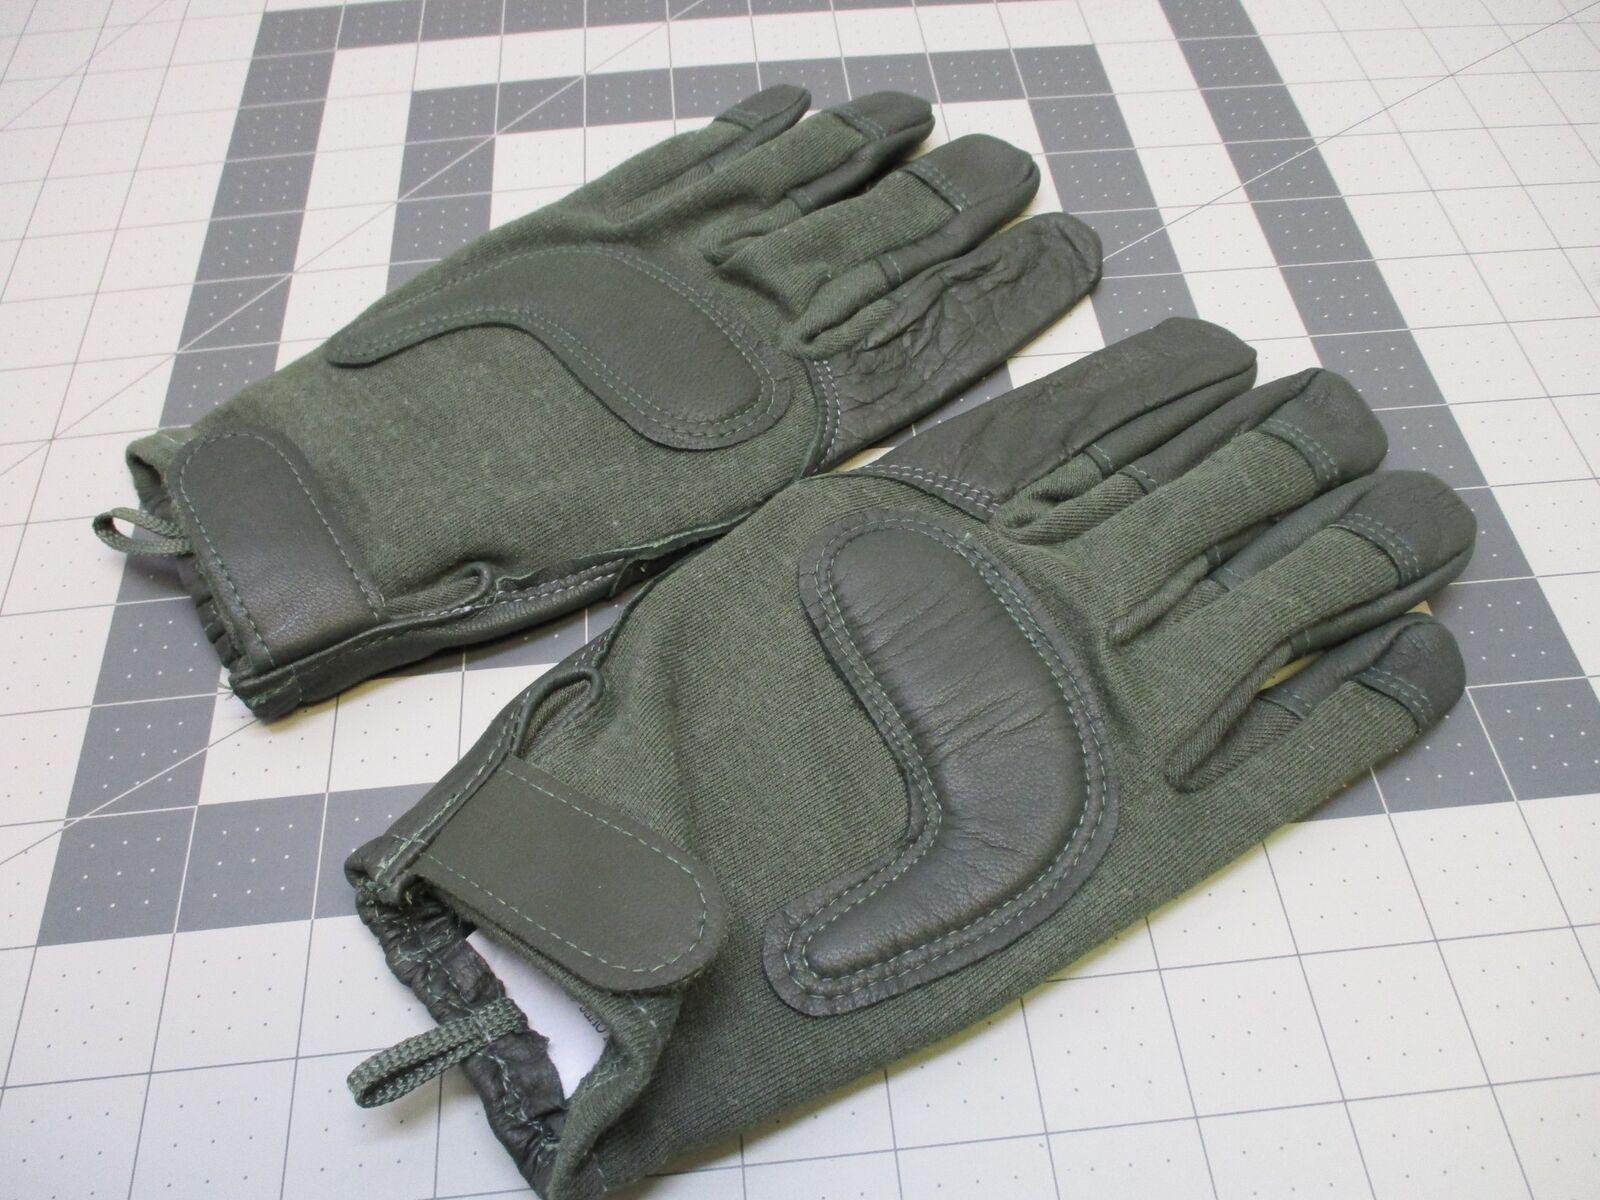 NEW US ARMY MADE WITH KEVLAR GLOVES HWI COMBAT GLOVE (XL) FOLIAGE GREEN LEATHER